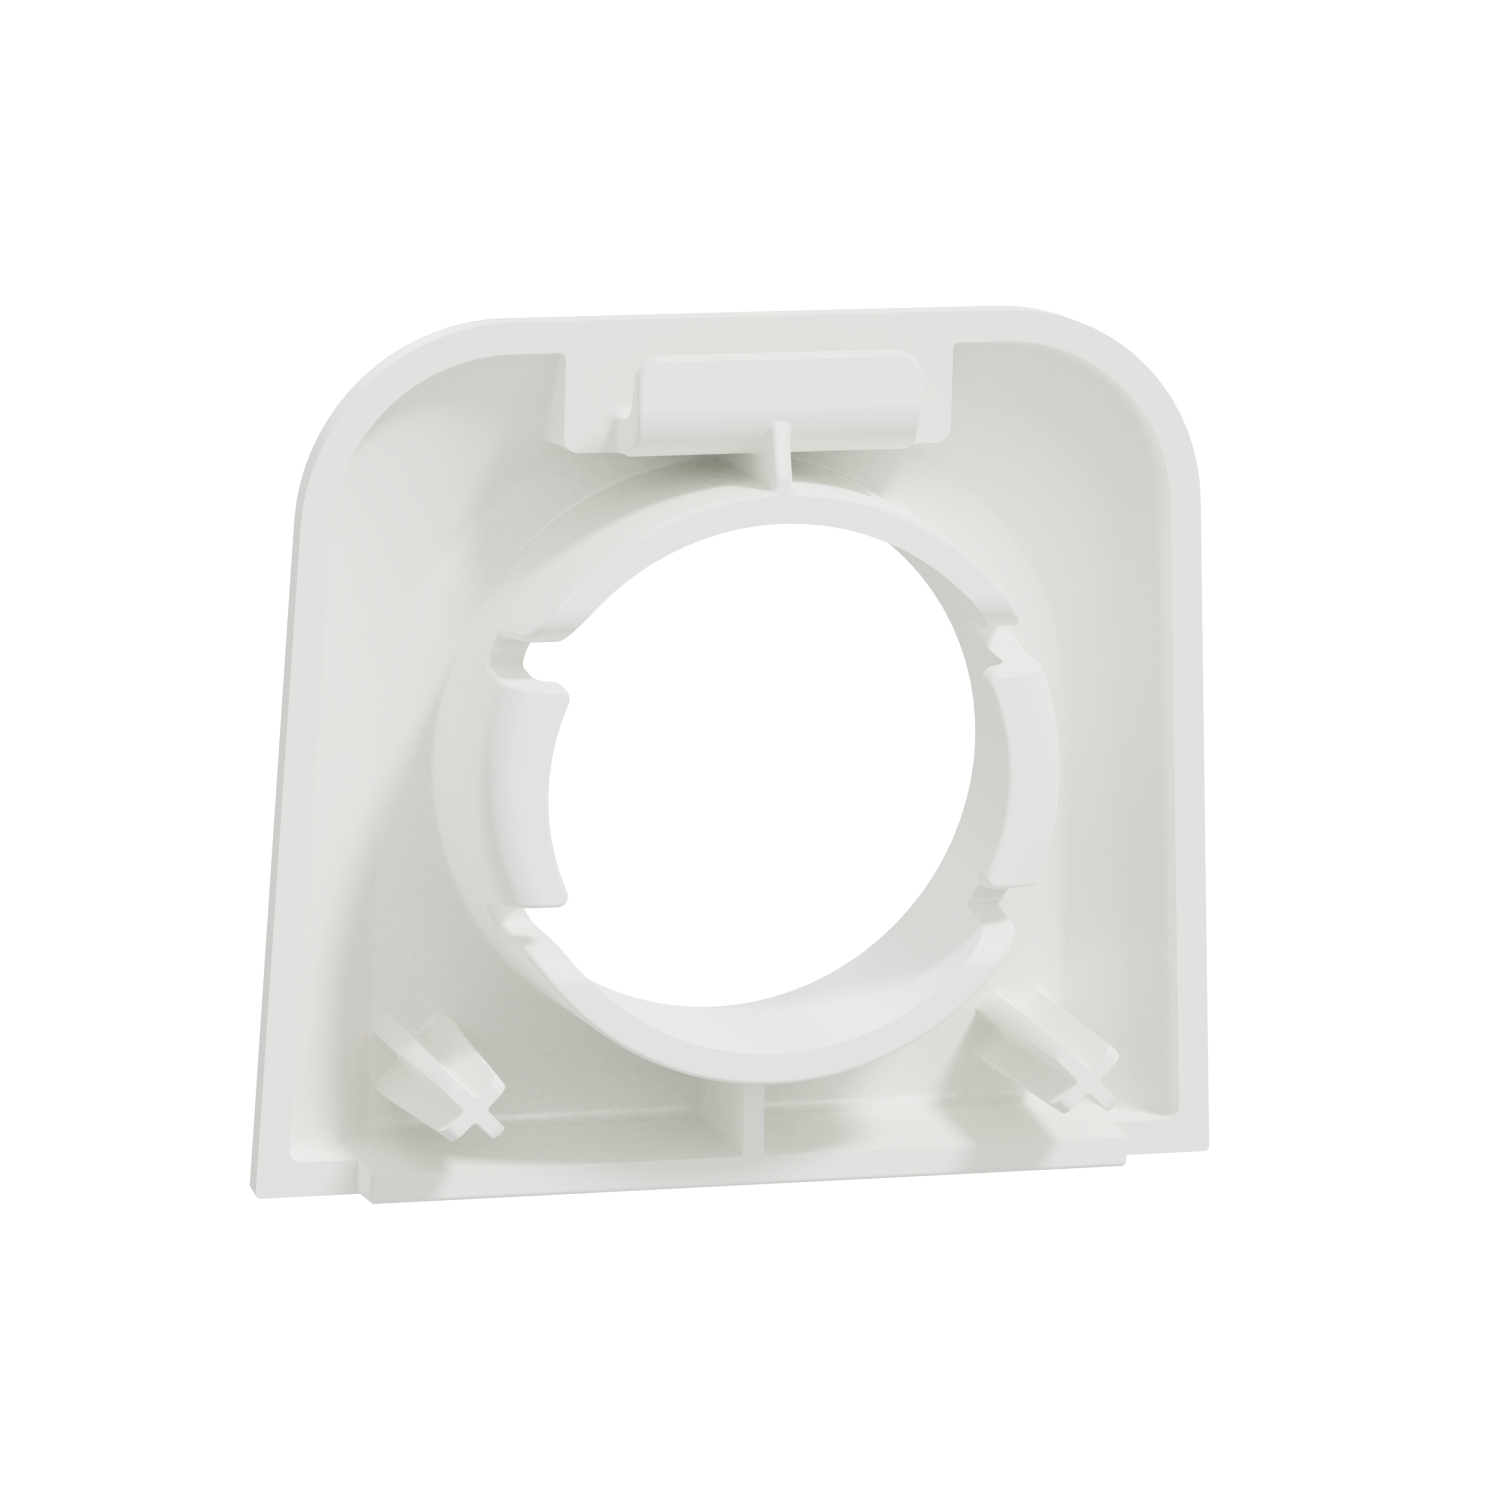 PDLO300CE-20 - PDL Iconic Outdoor Conduit Adaptor 20mm - White